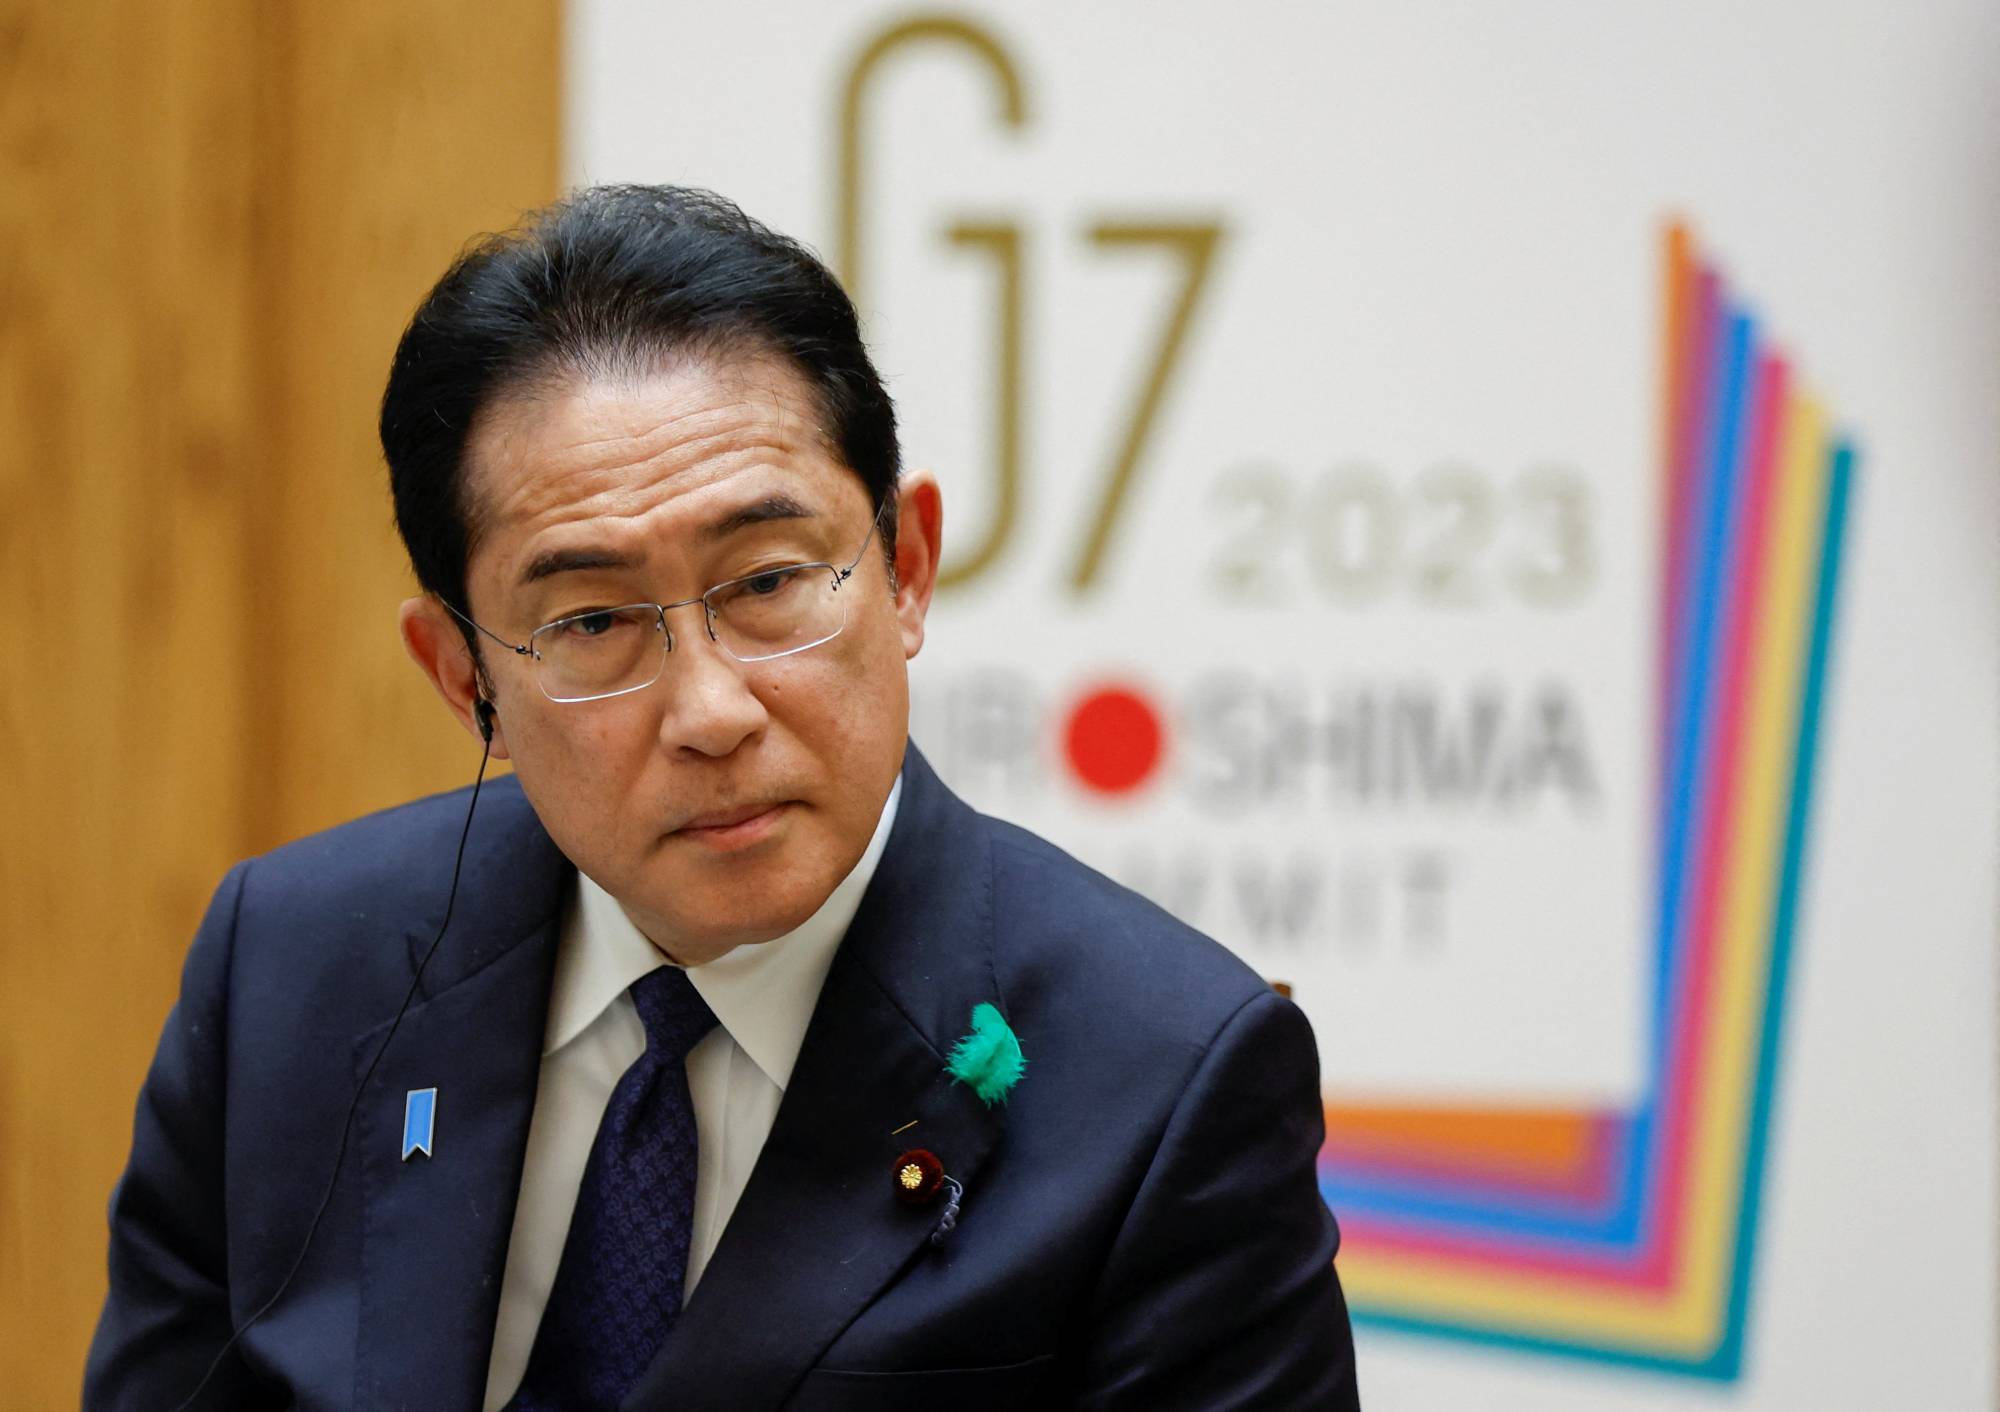 Prime Minister Fumio Kishida attends a roundtable interview with members of the foreign media at the Prime Minister's Office in Tokyo on April 20. | REUTERS